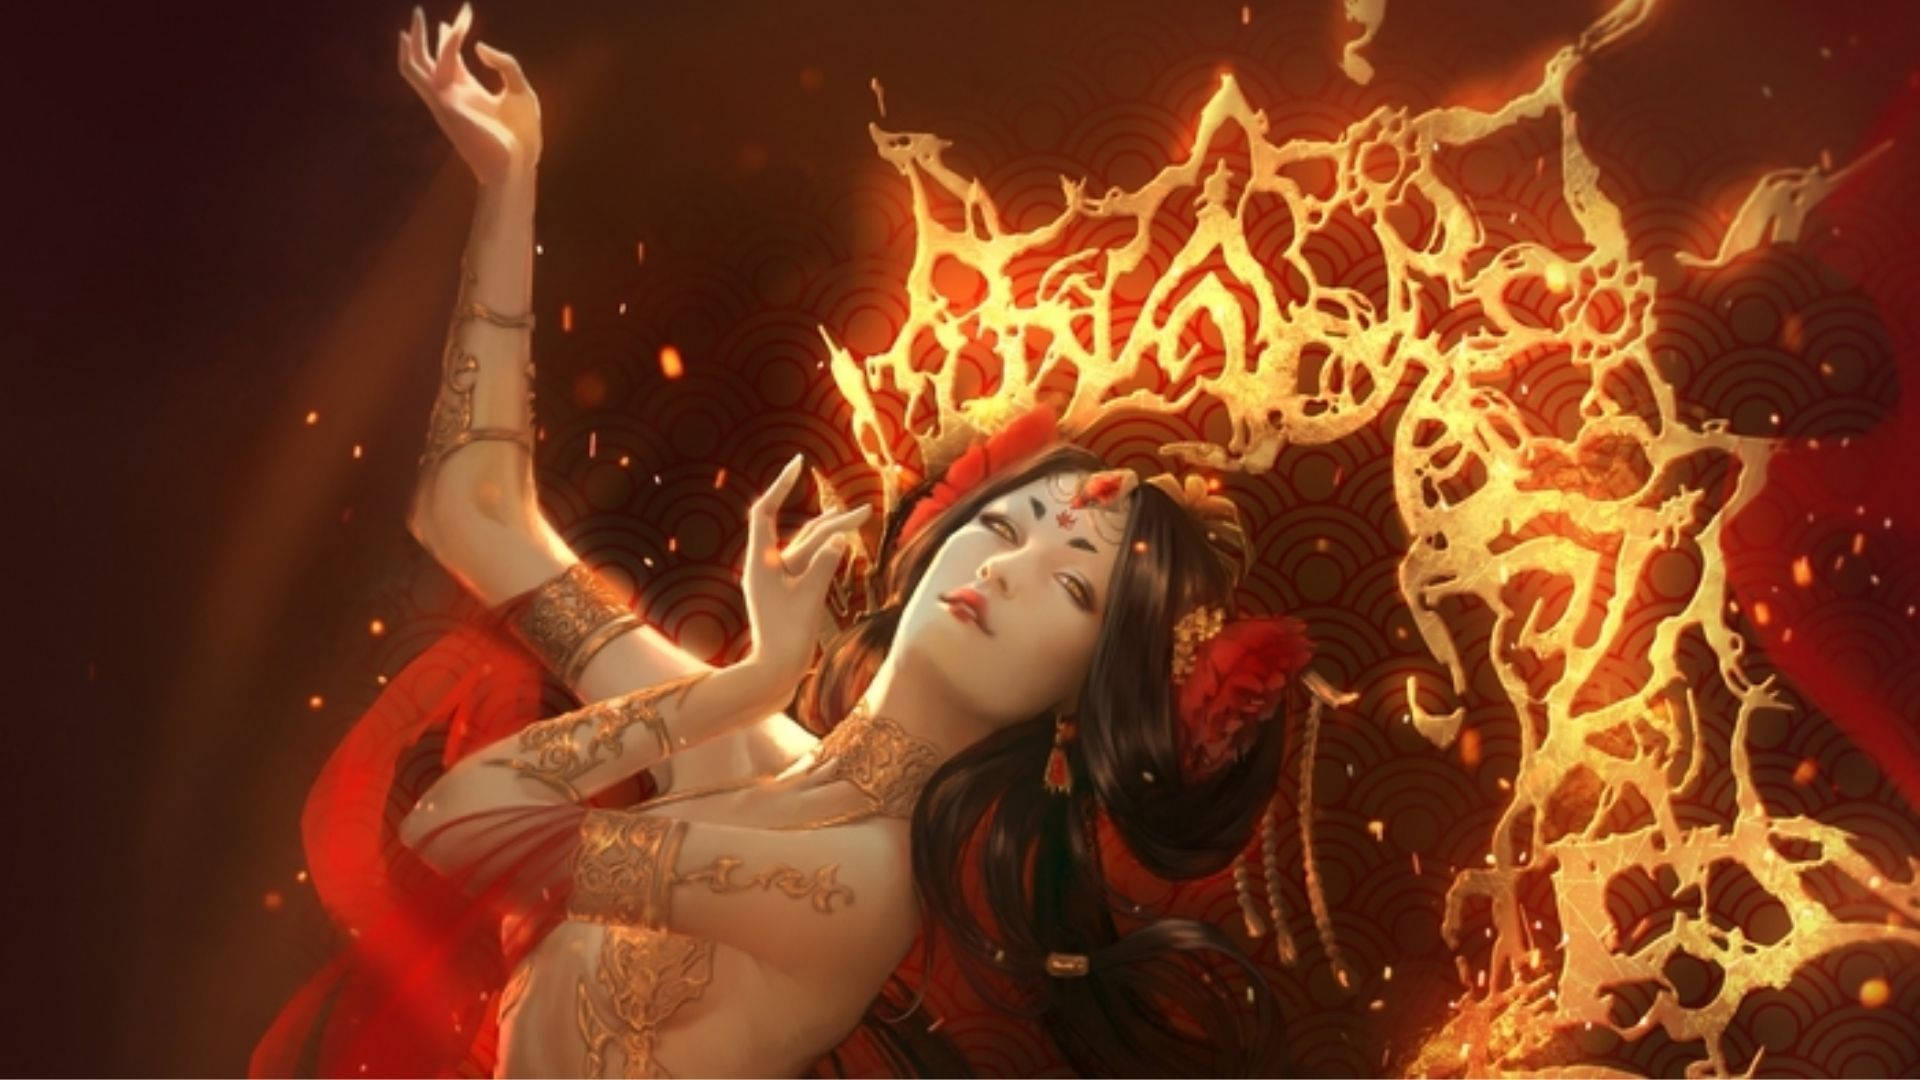 Dancing Fire Girl Background